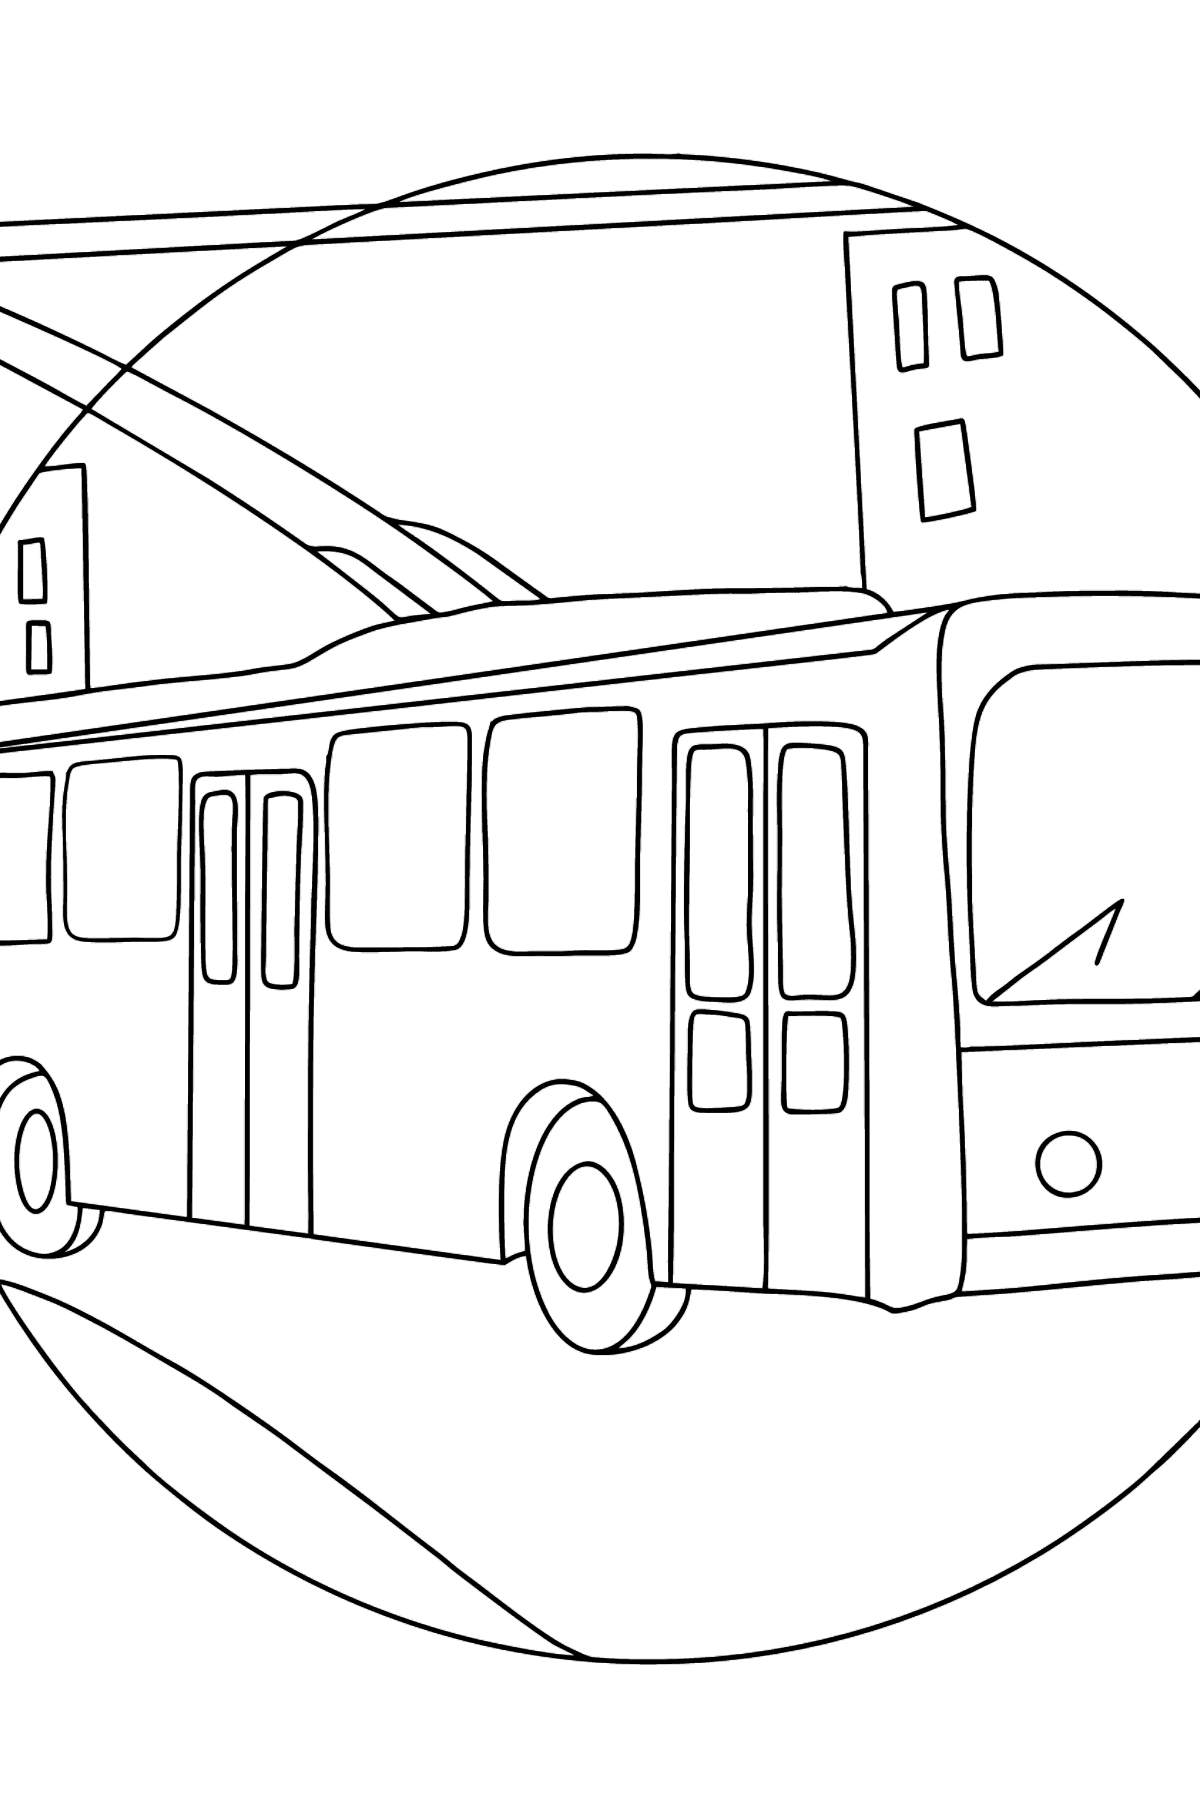 Сoloring page Trolley Bus - Coloring Pages for Kids